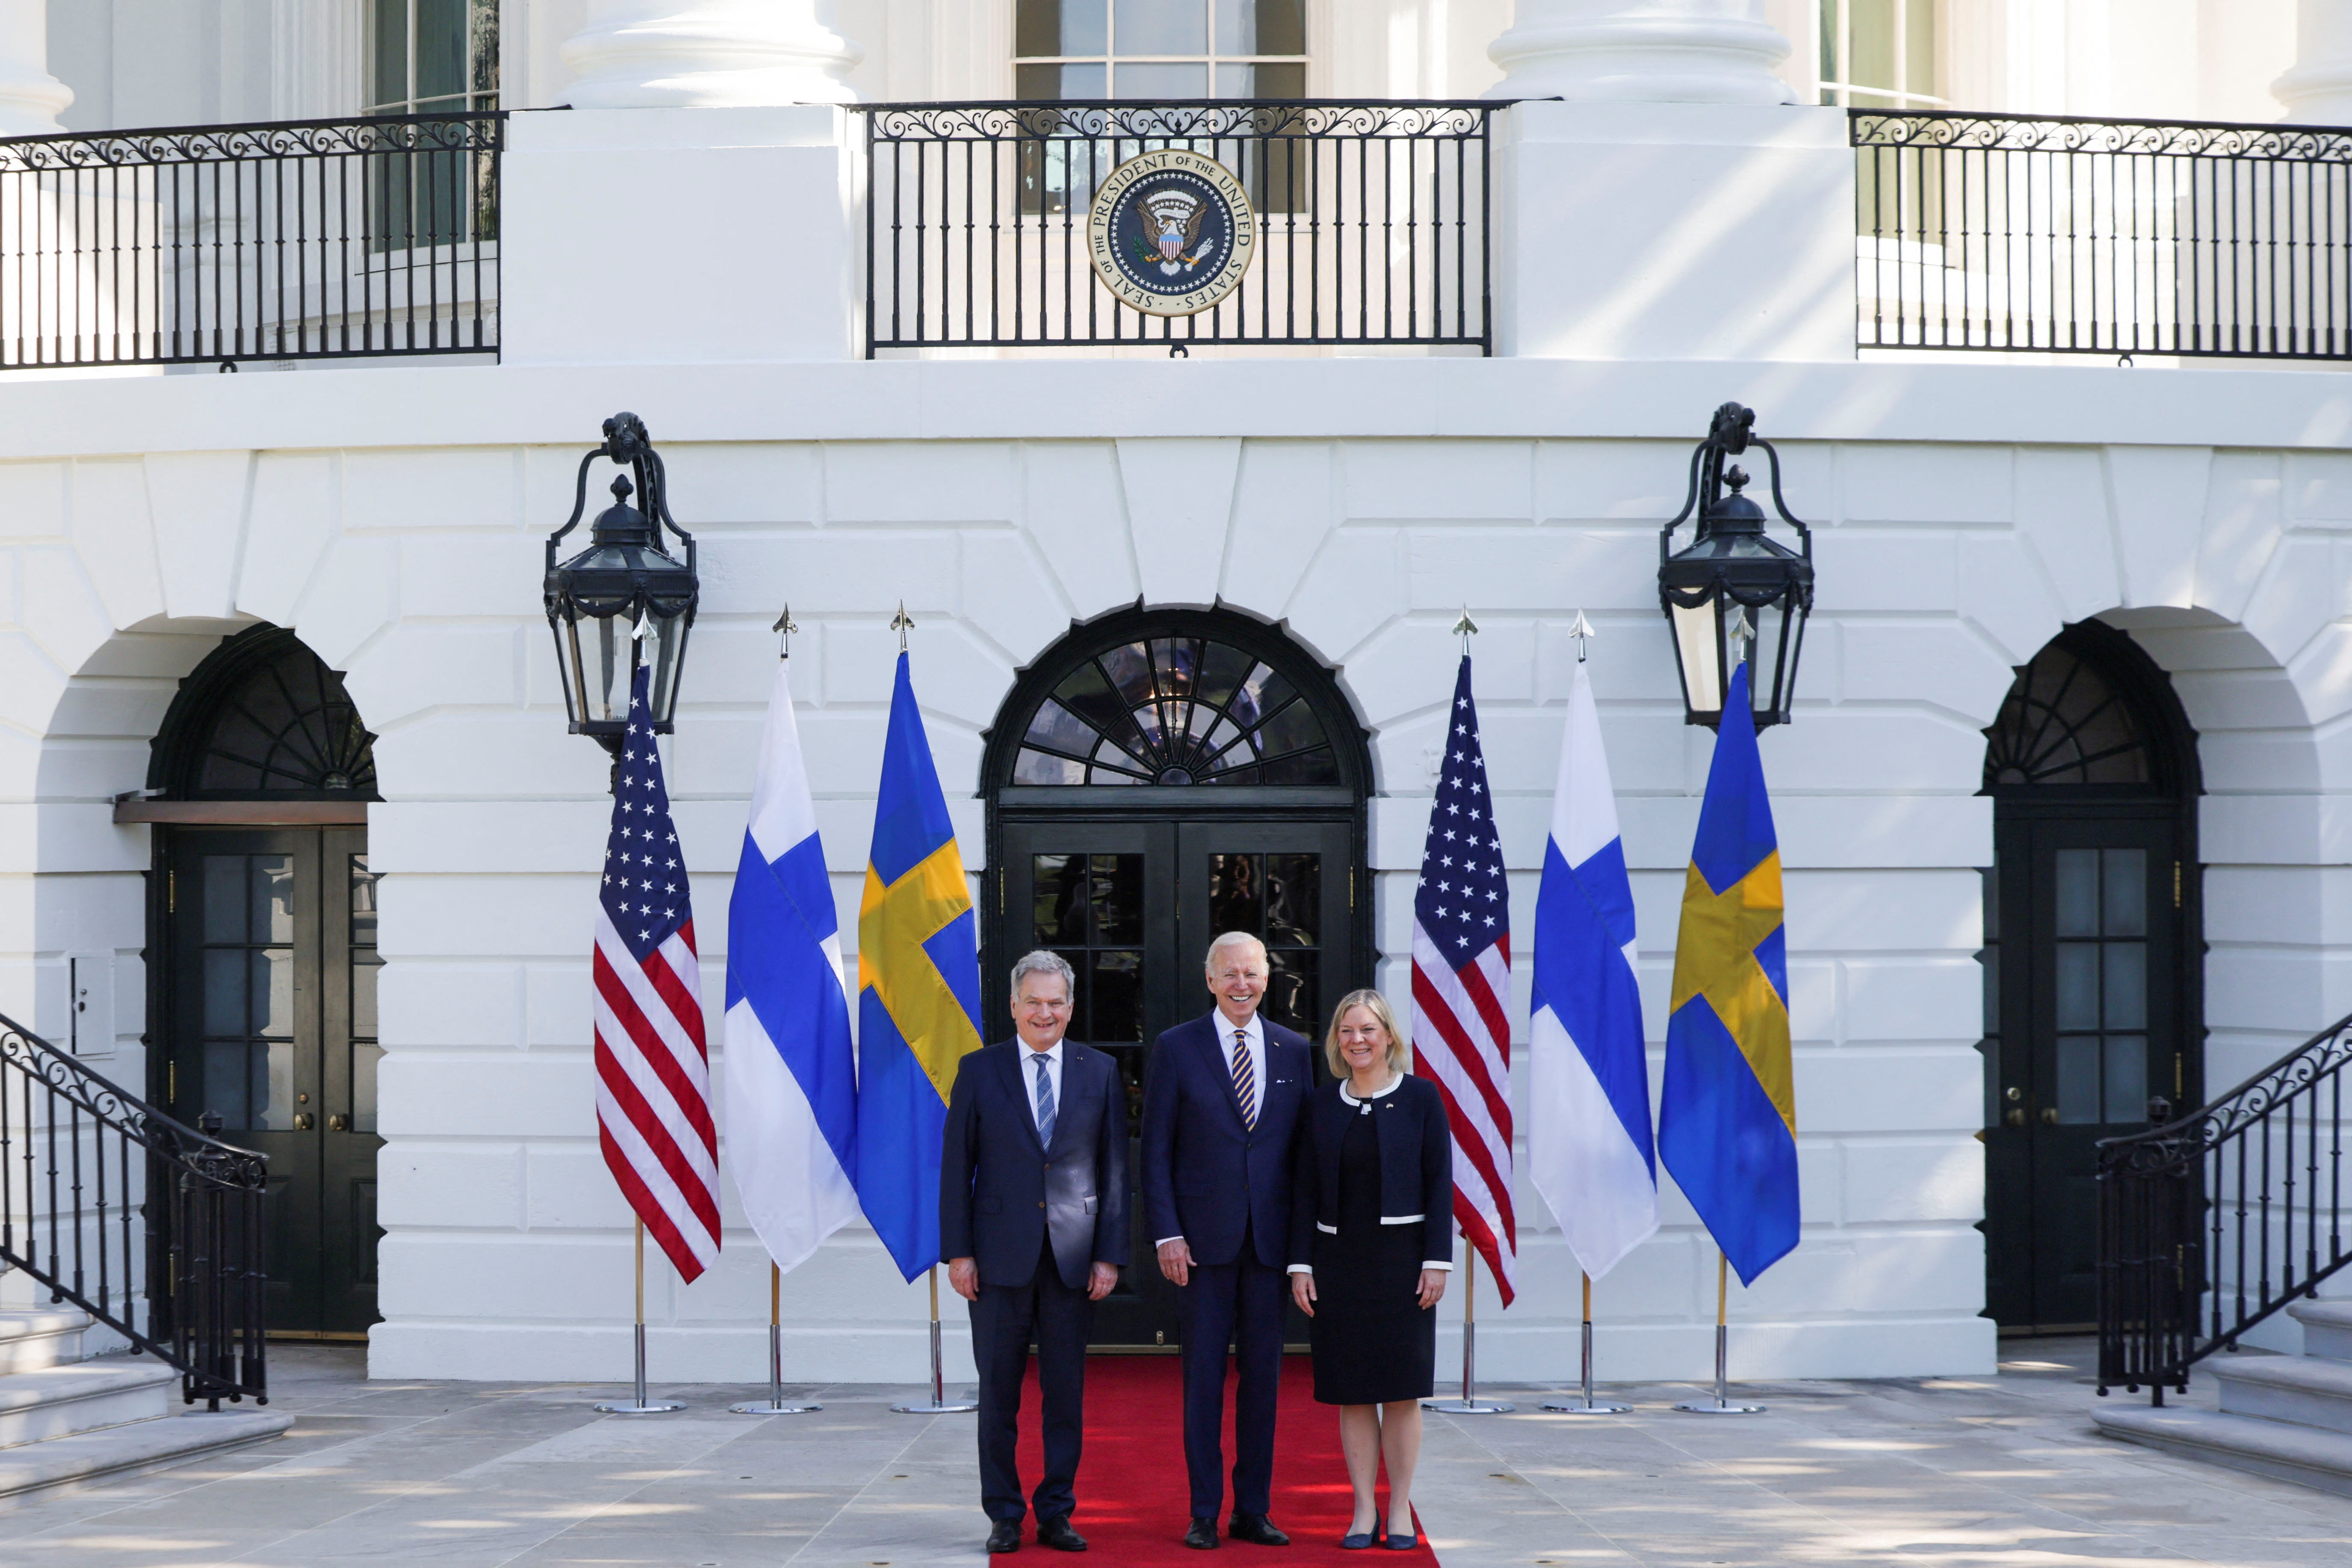 U.S. President Biden meets with Sweden's Prime Minister Andersson and Finland's President Niinisto in Washington